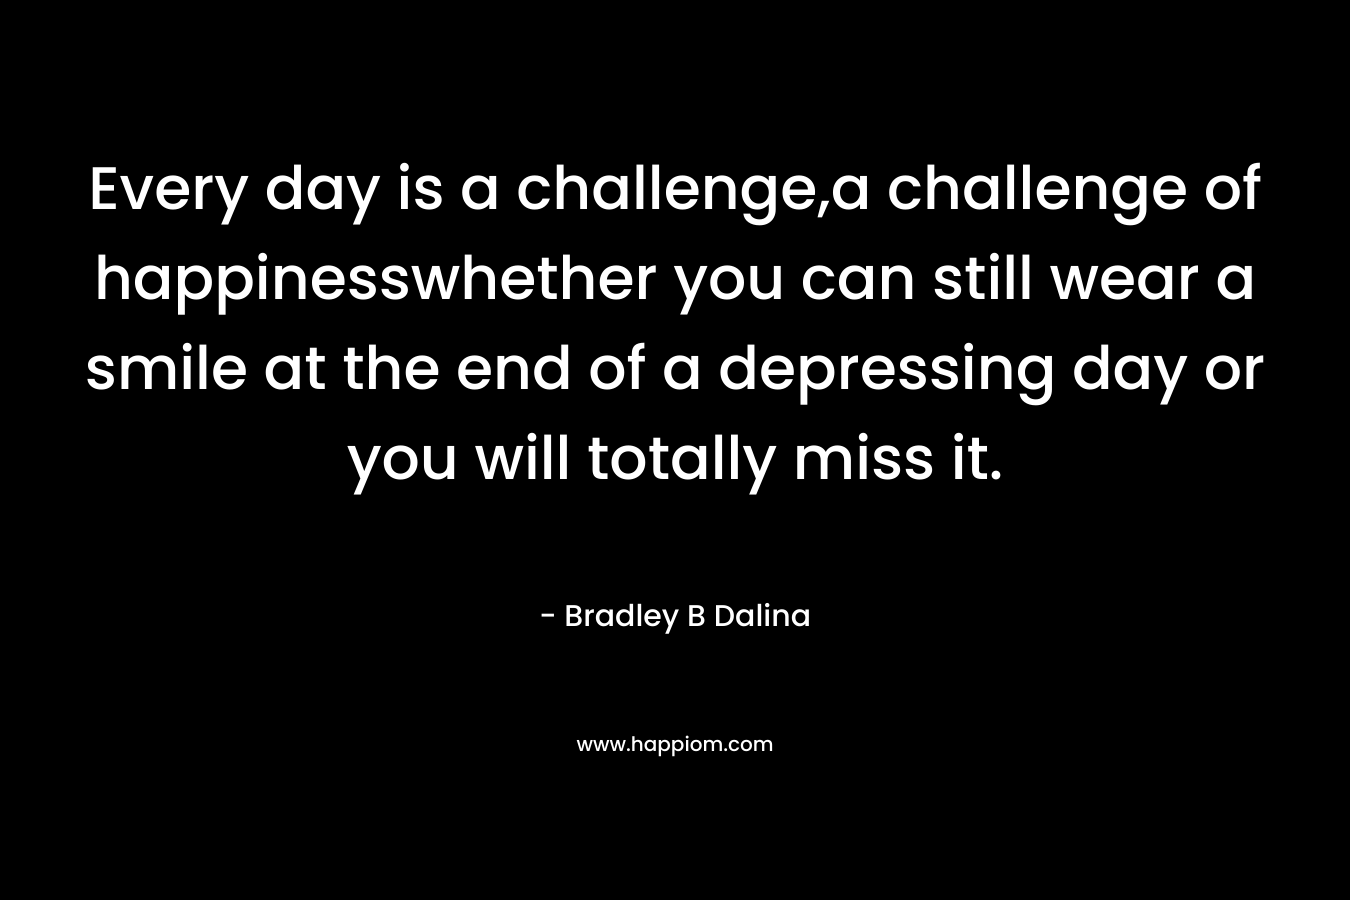 Every day is a challenge,a challenge of happinesswhether you can still wear a smile at the end of a depressing day or you will totally miss it. – Bradley B Dalina